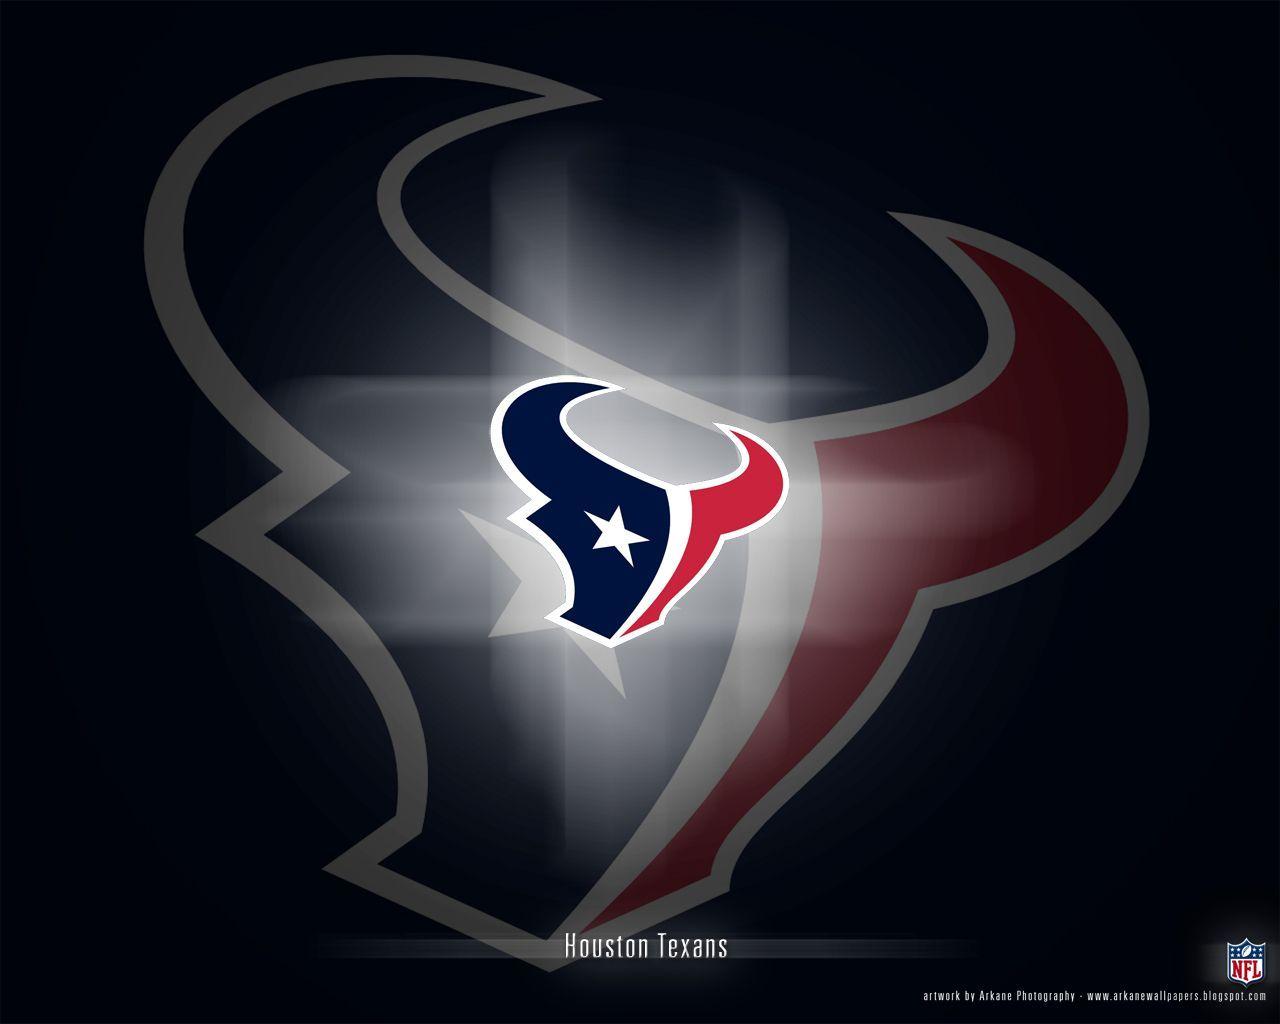 2. NFL Houston Texans Nail Art Decals - wide 5